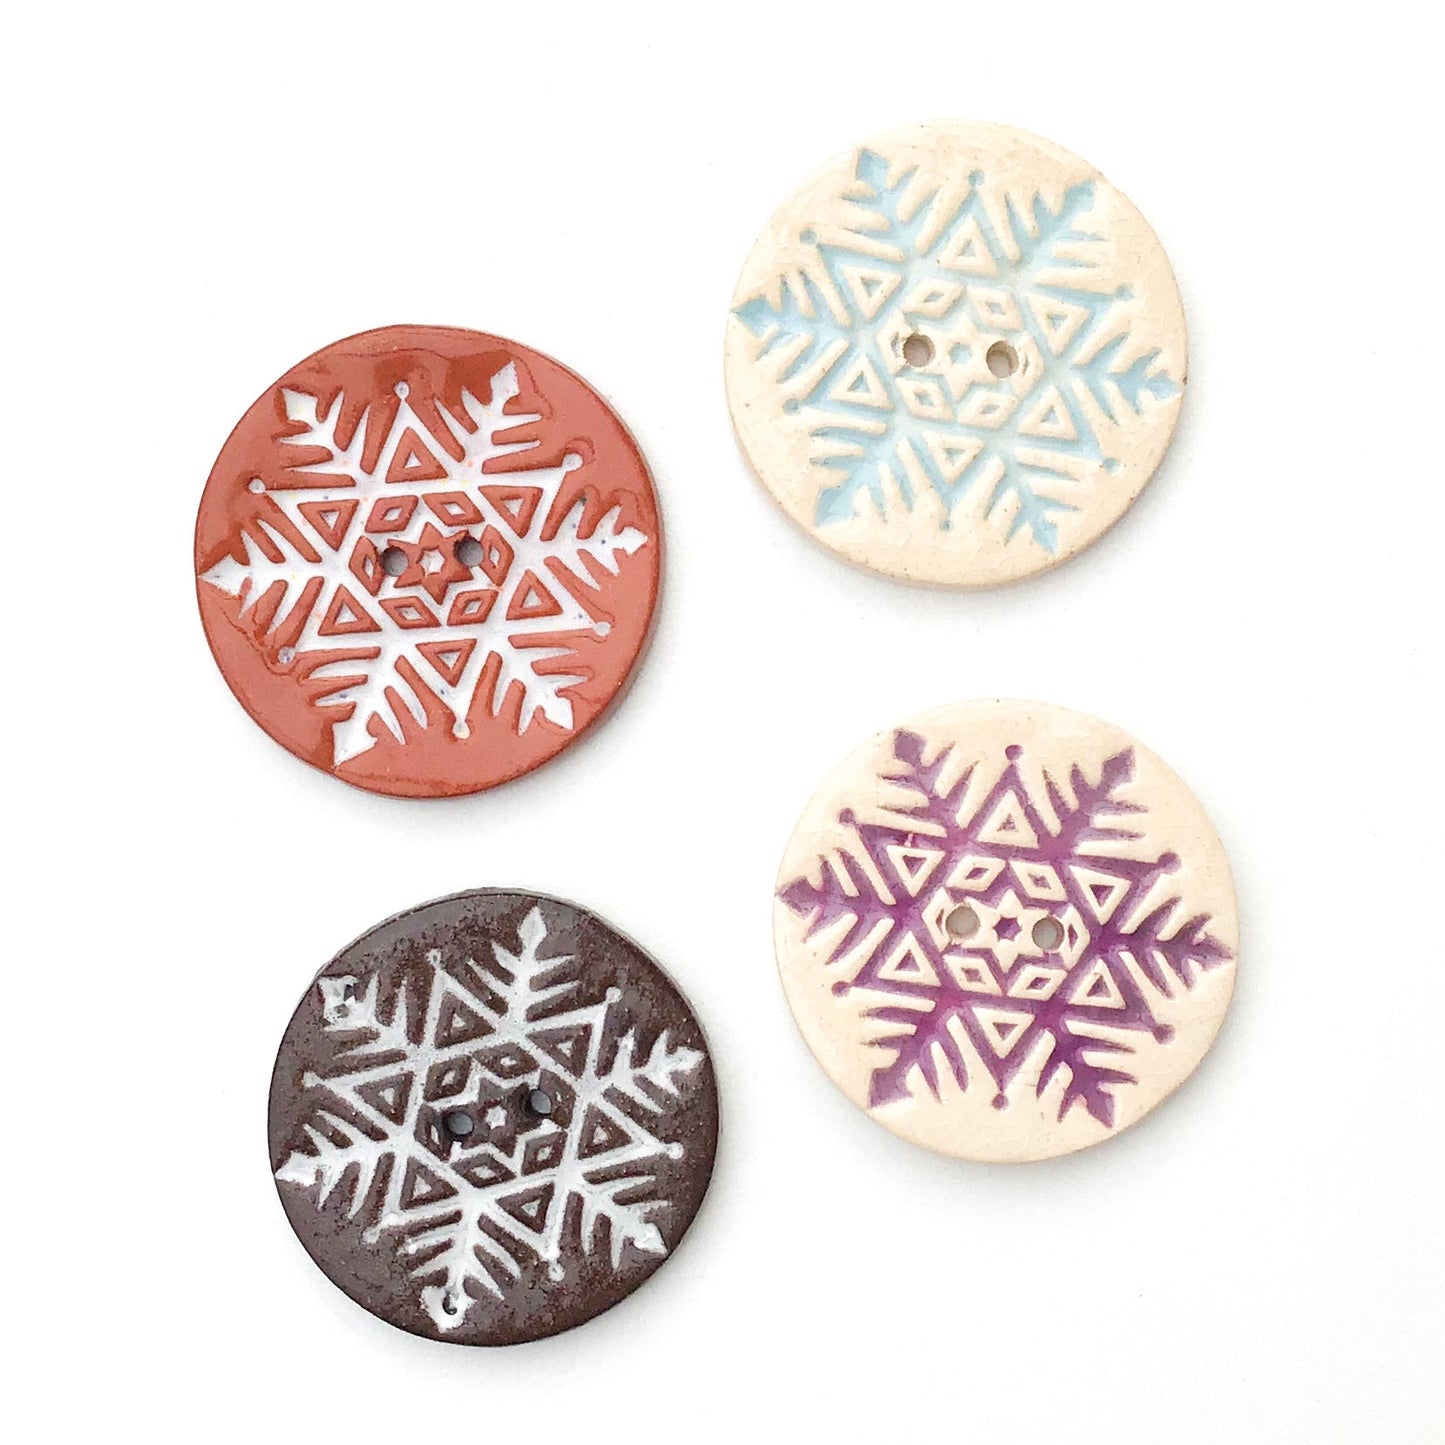 (Wholesale Accounts Only) 1 1/2" Large Snowflake - round - flat